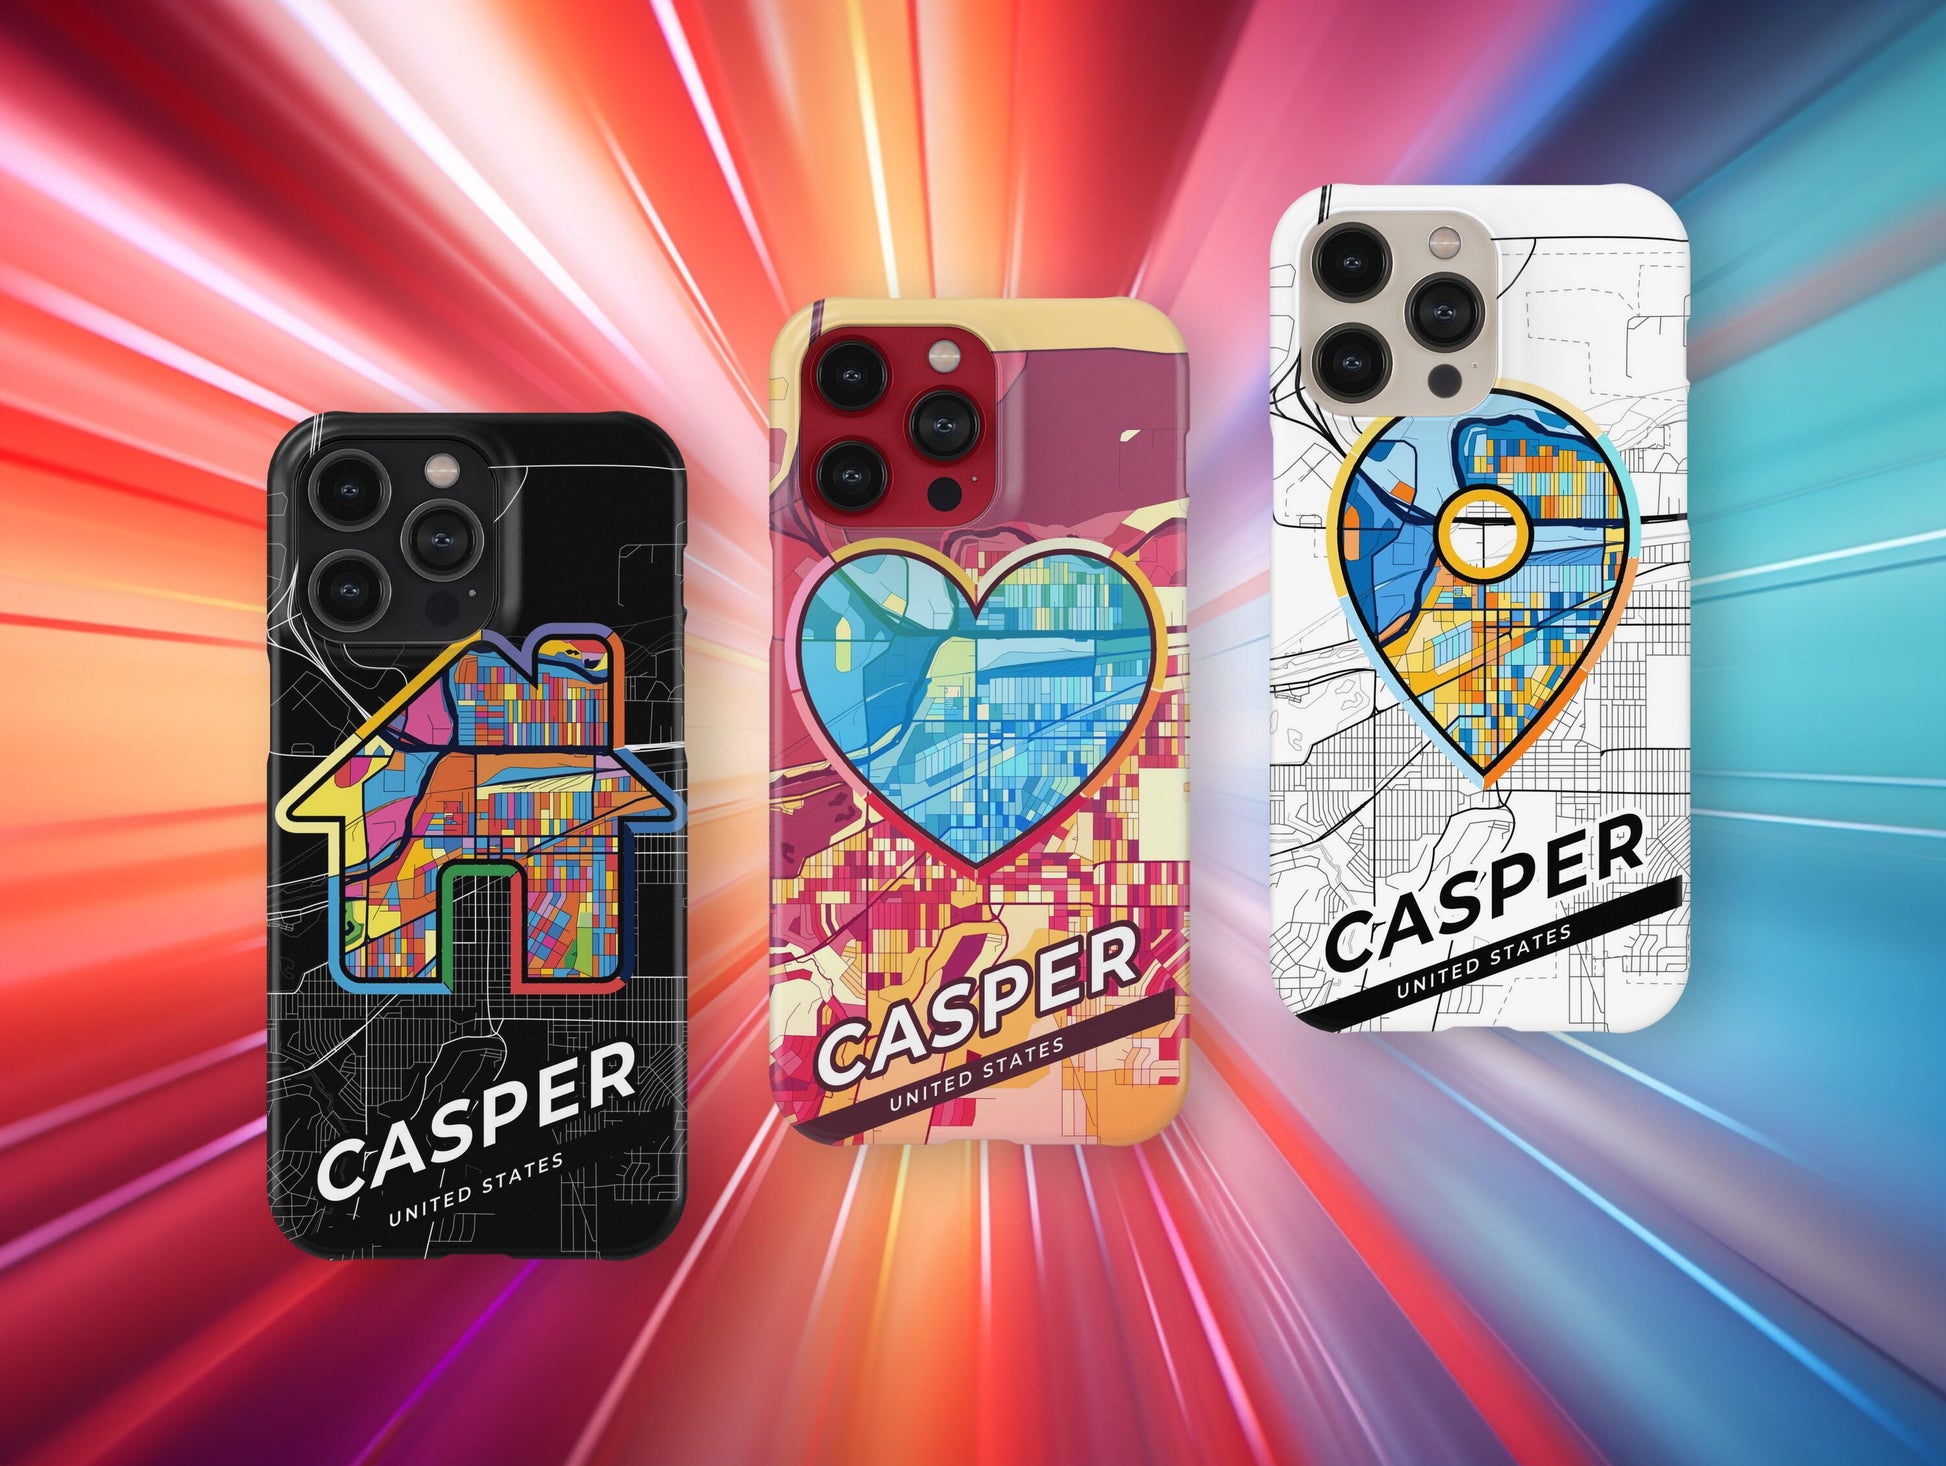 Casper Wyoming slim phone case with colorful icon. Birthday, wedding or housewarming gift. Couple match cases.